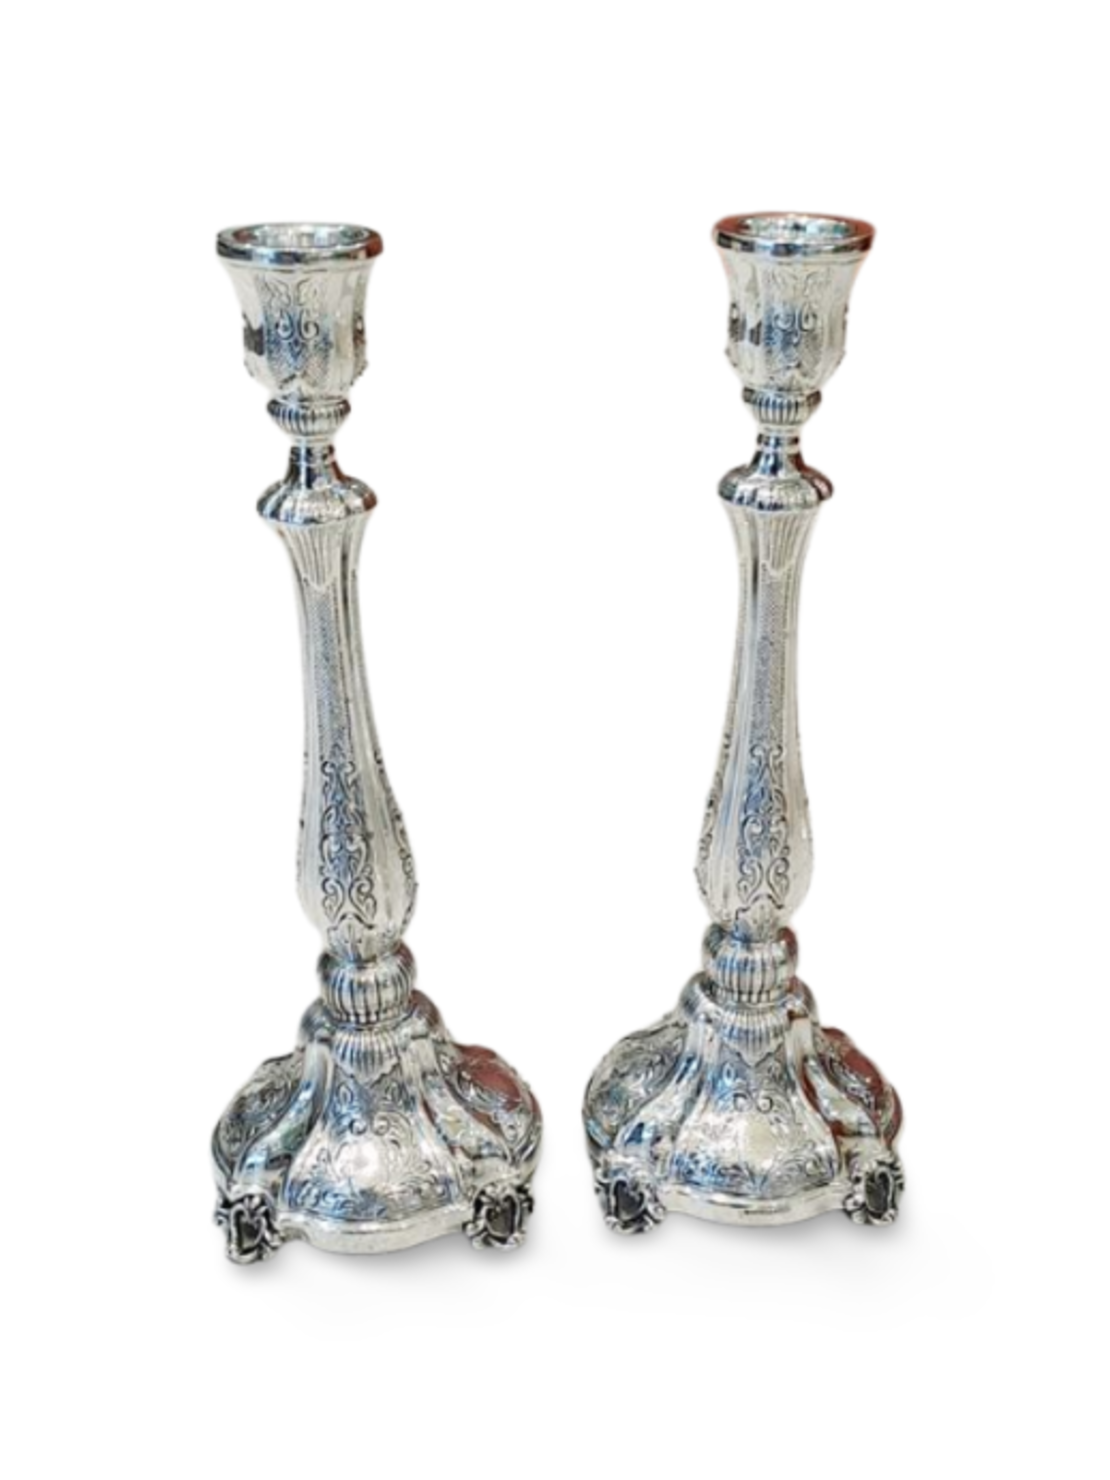 A pair of pure silver Solomon candlesticks